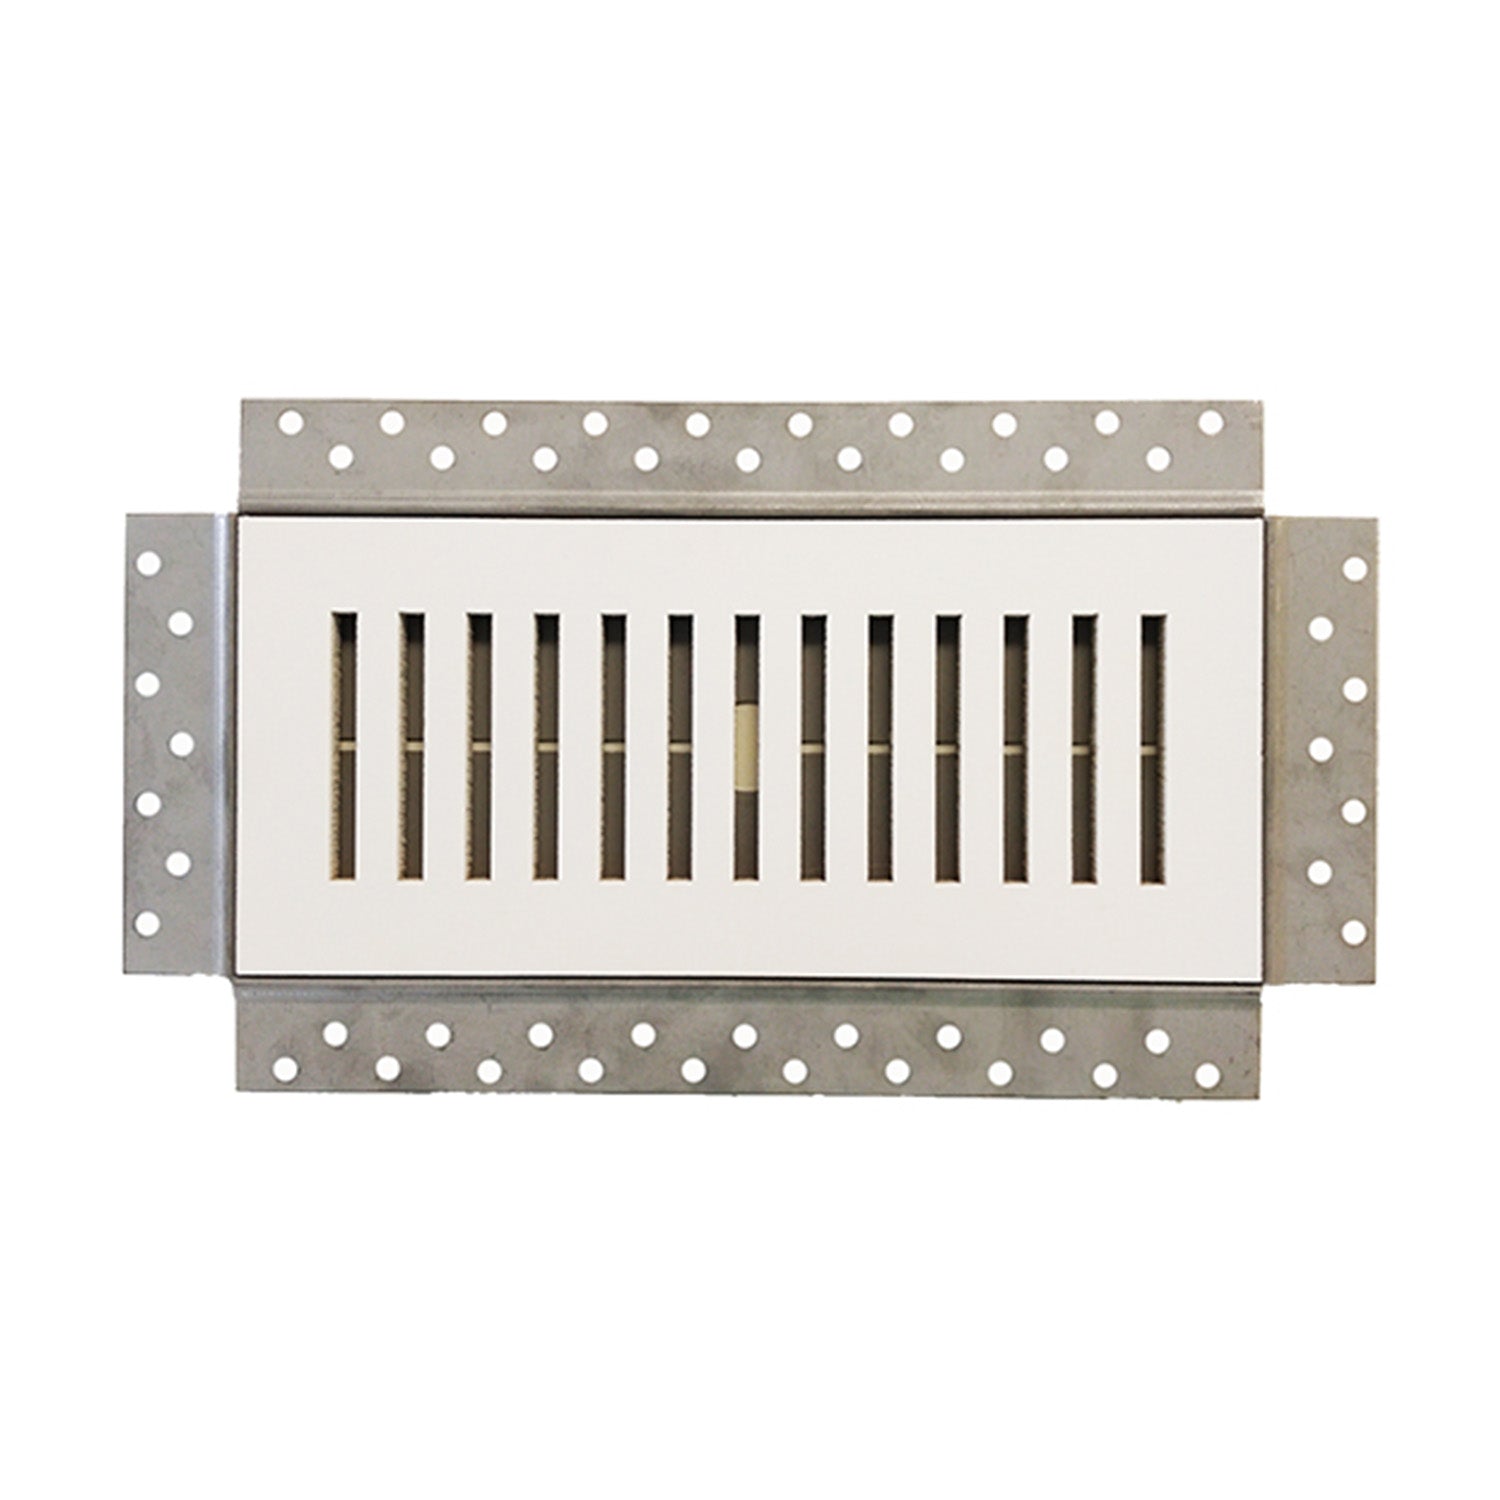 ENVISIVENT (CB5002) – Removable Magnetic Mud-In Flush Mounted Wall/Ceiling Air Supply Vent, 10” x 4” Duct